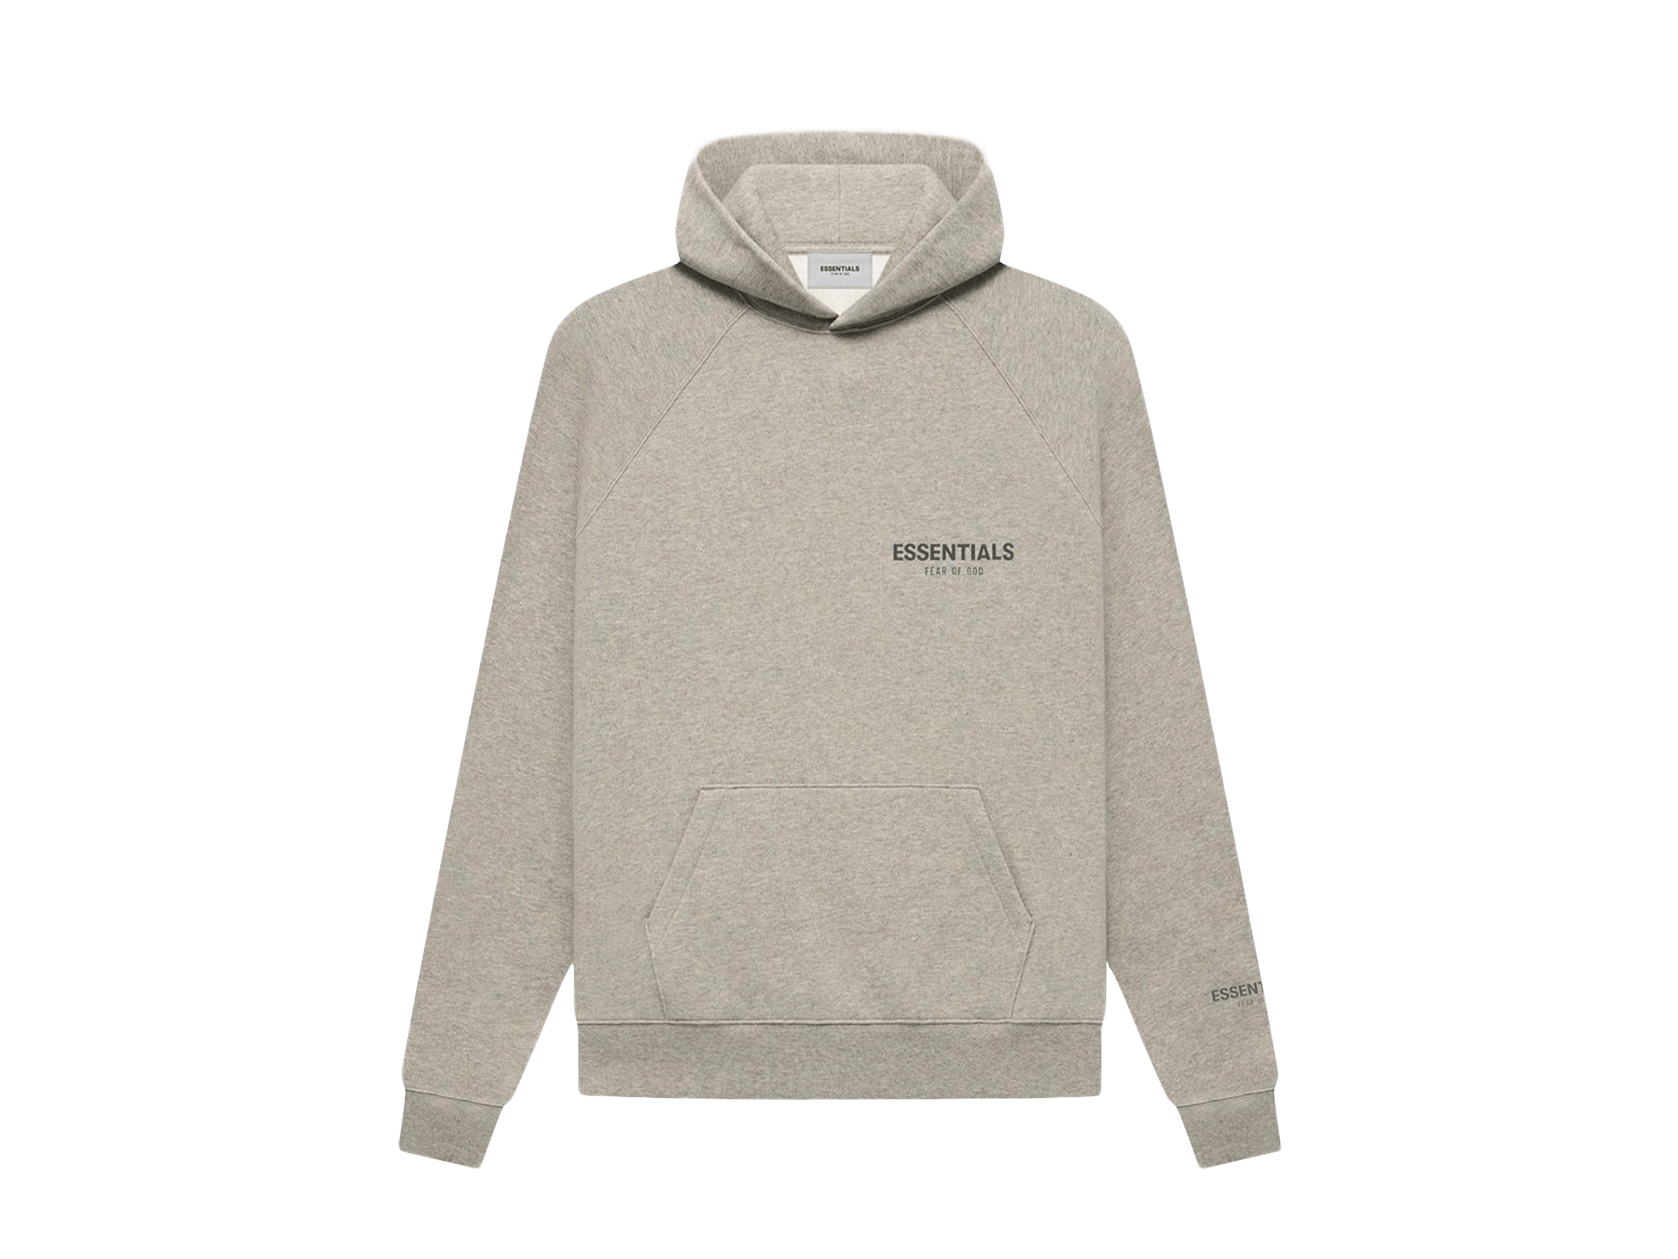 Double Boxed hoodie 149.99 FEAR OF GOD ESSENTIALS CORE PULLOVER HOODIE DARK HEATHER OATMEAL Double Boxed